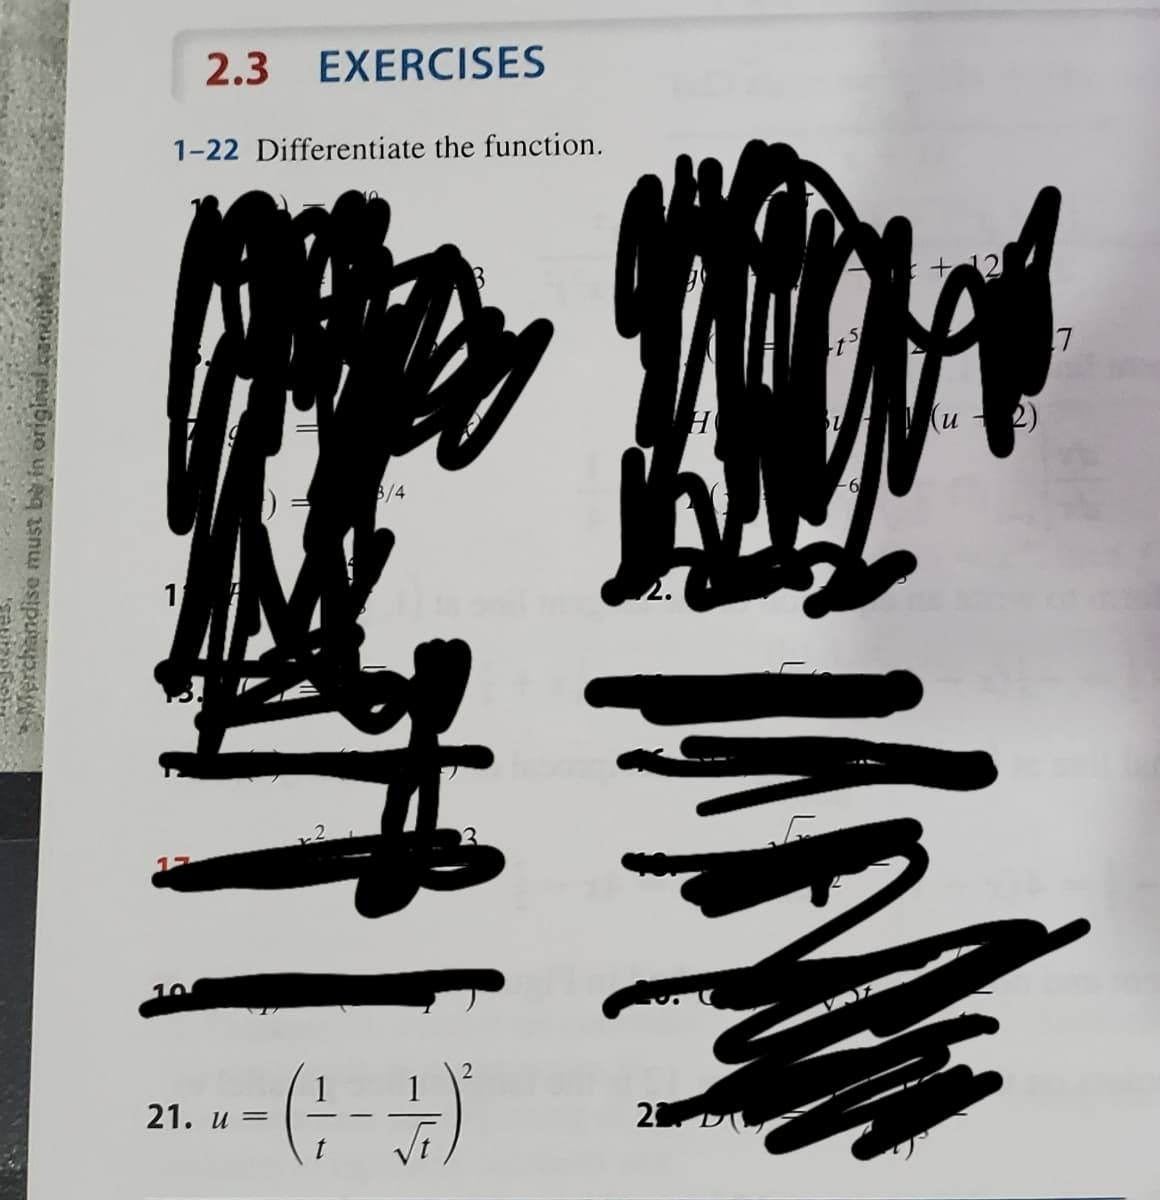 2.3 EXERCISES
1-22 Differentiate the function.
2)
3/4
2. -- (-)
2 D
и —
Merchandise must be in origh
